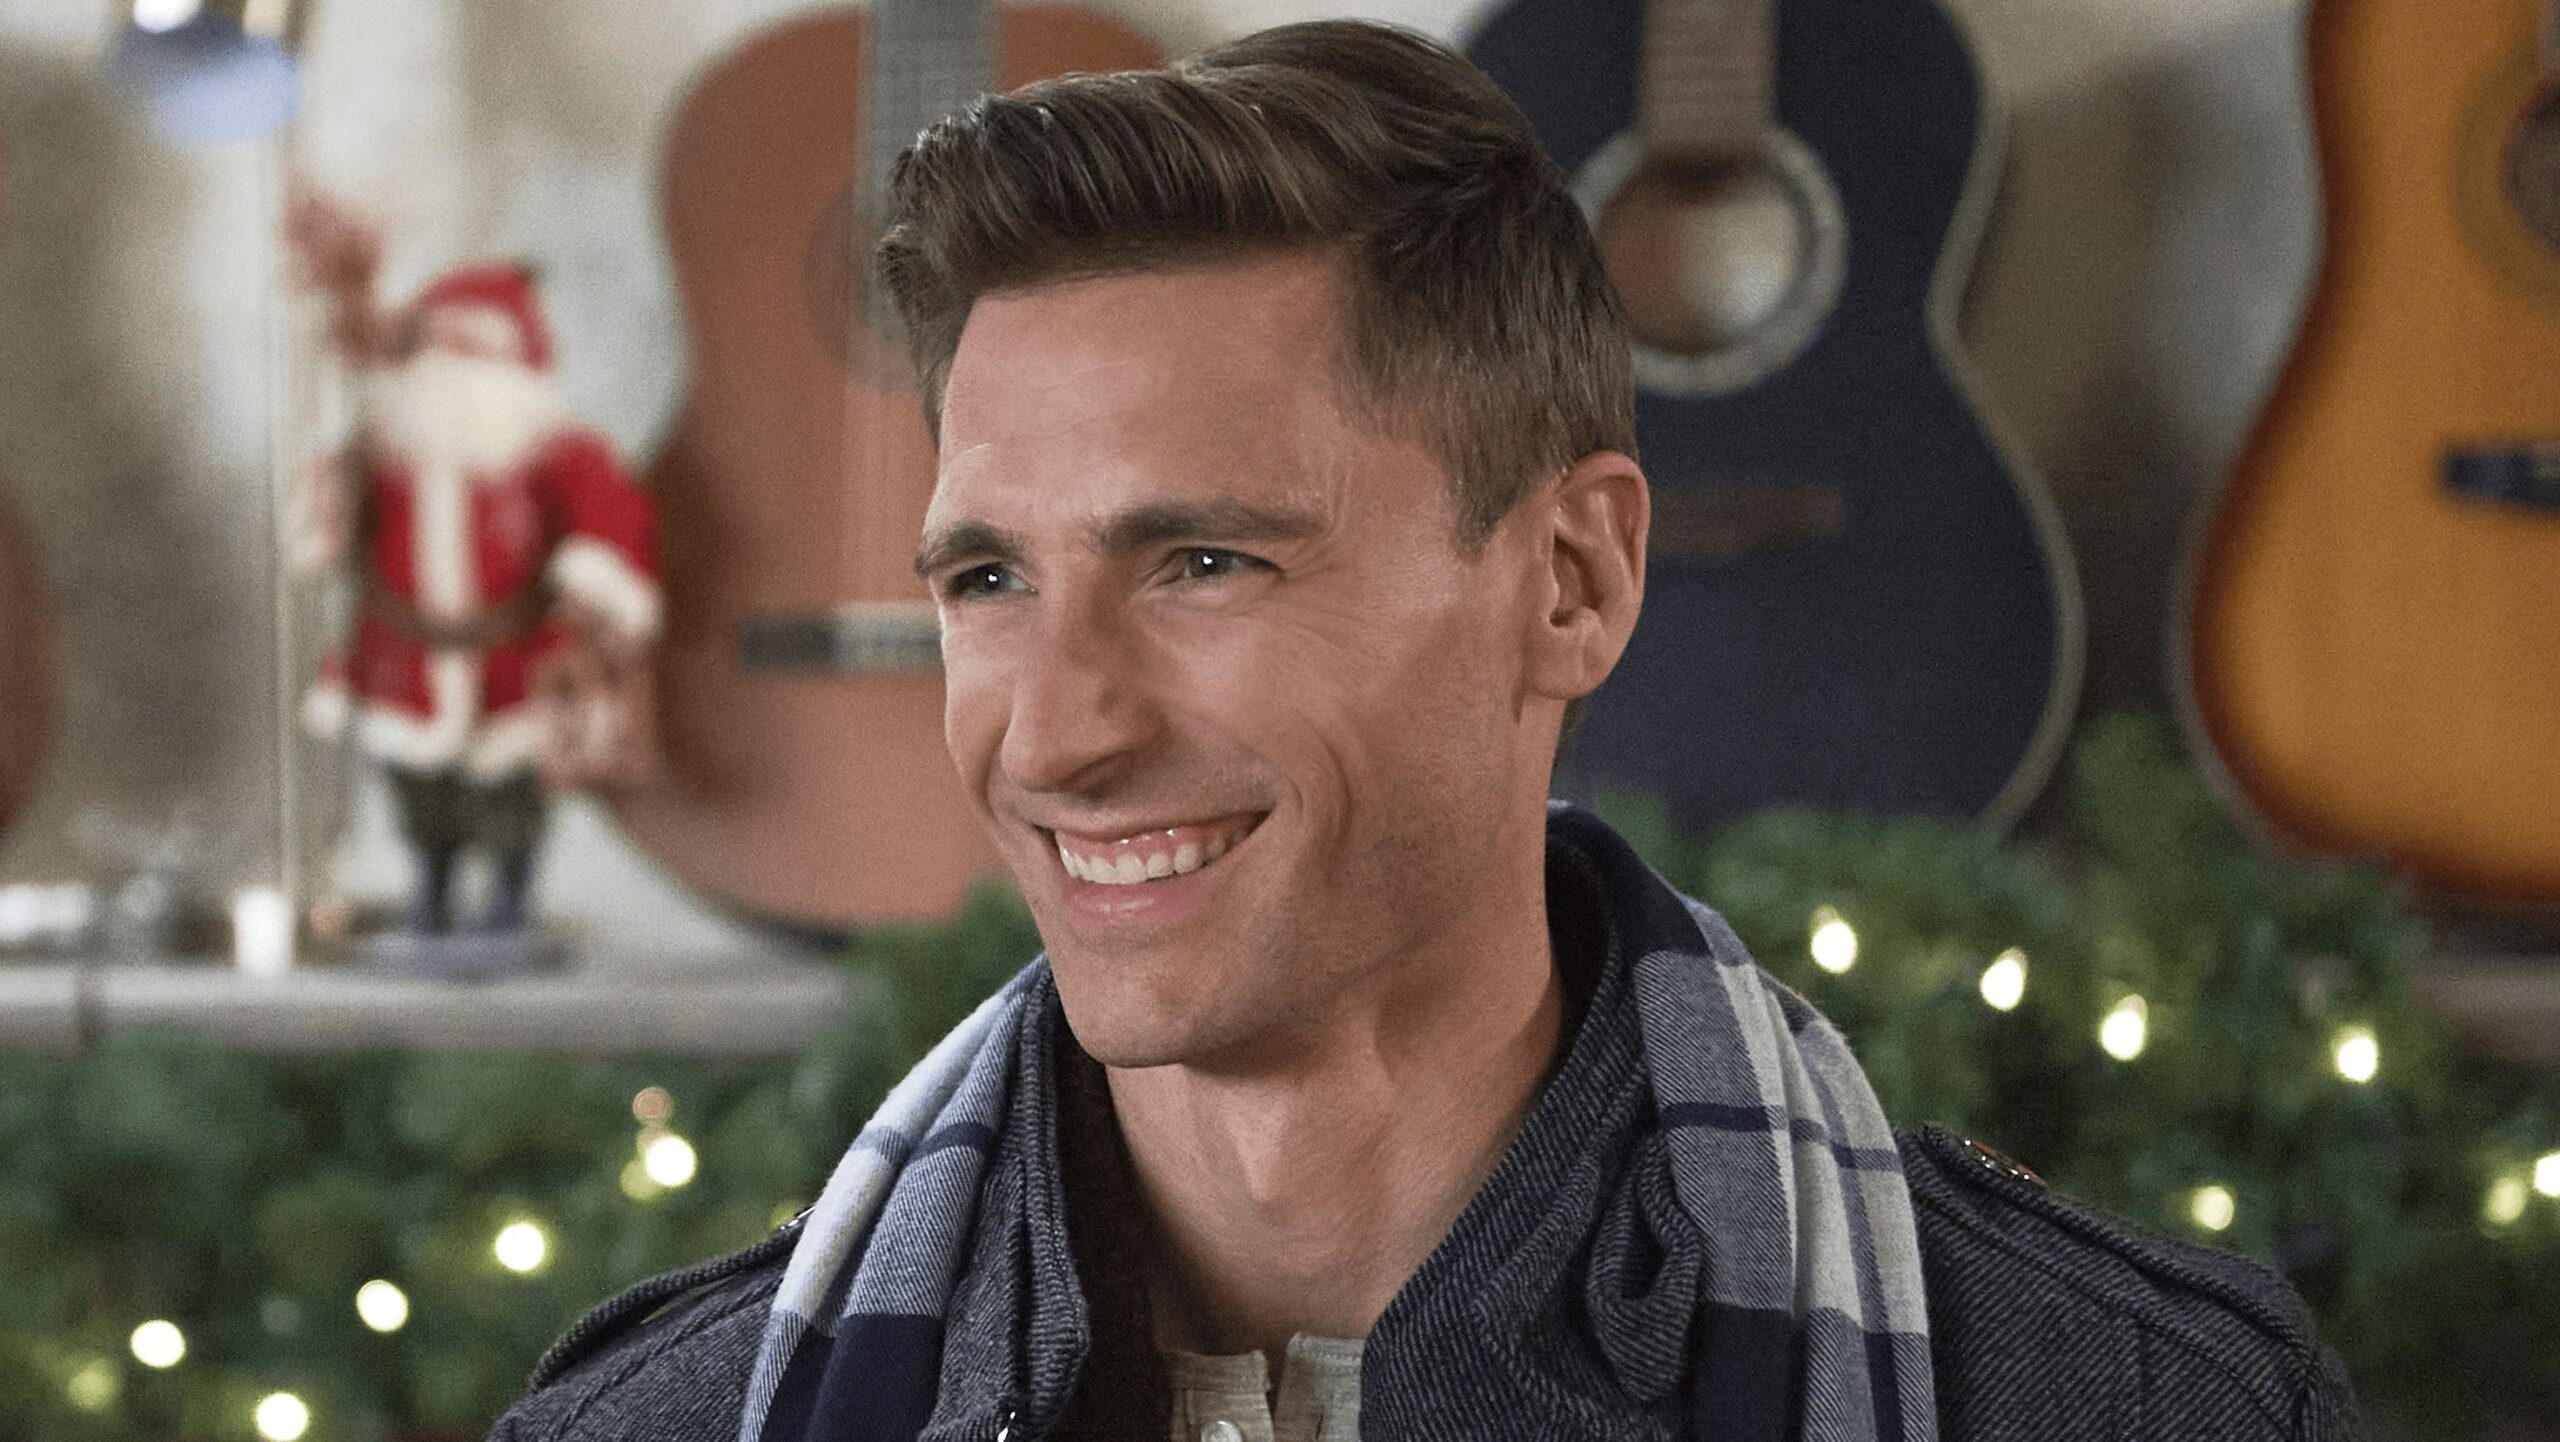 7 Hallmark Stars With the Most Christmas Movies Like Lacey Chabert